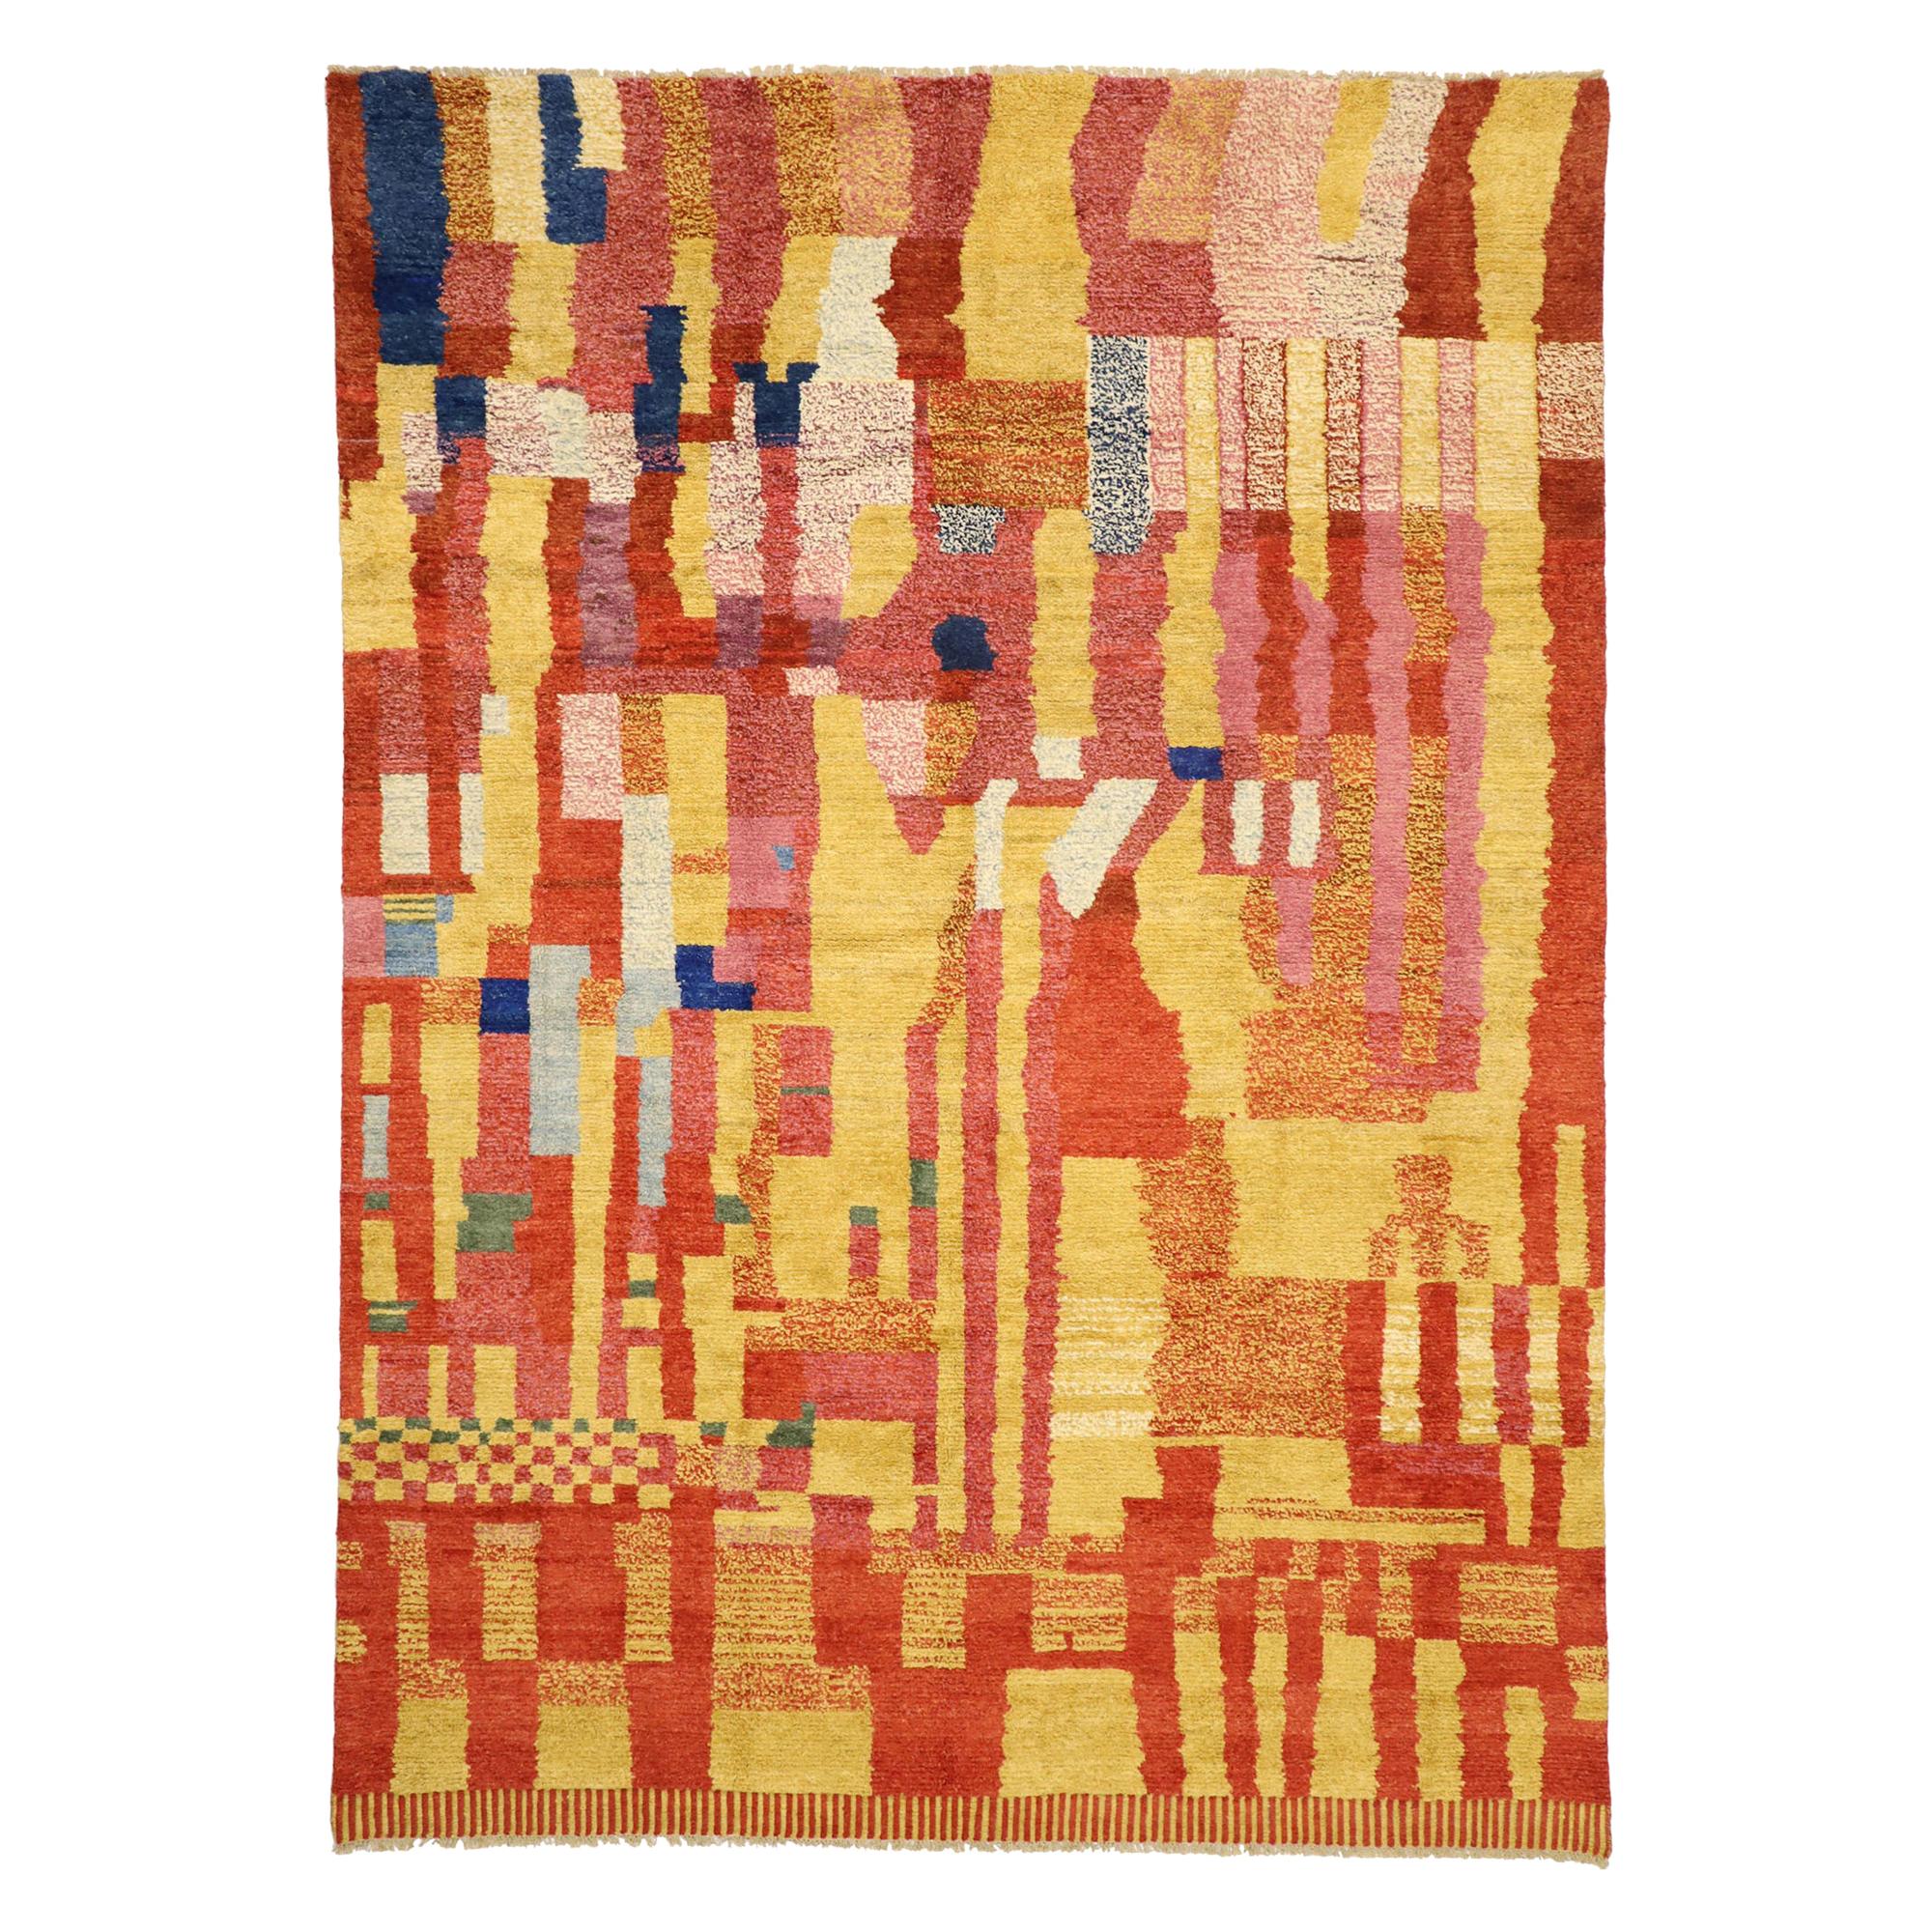 New Color Block Moroccan Rug with Abstract Cubist Style Inspired by Paul Klee